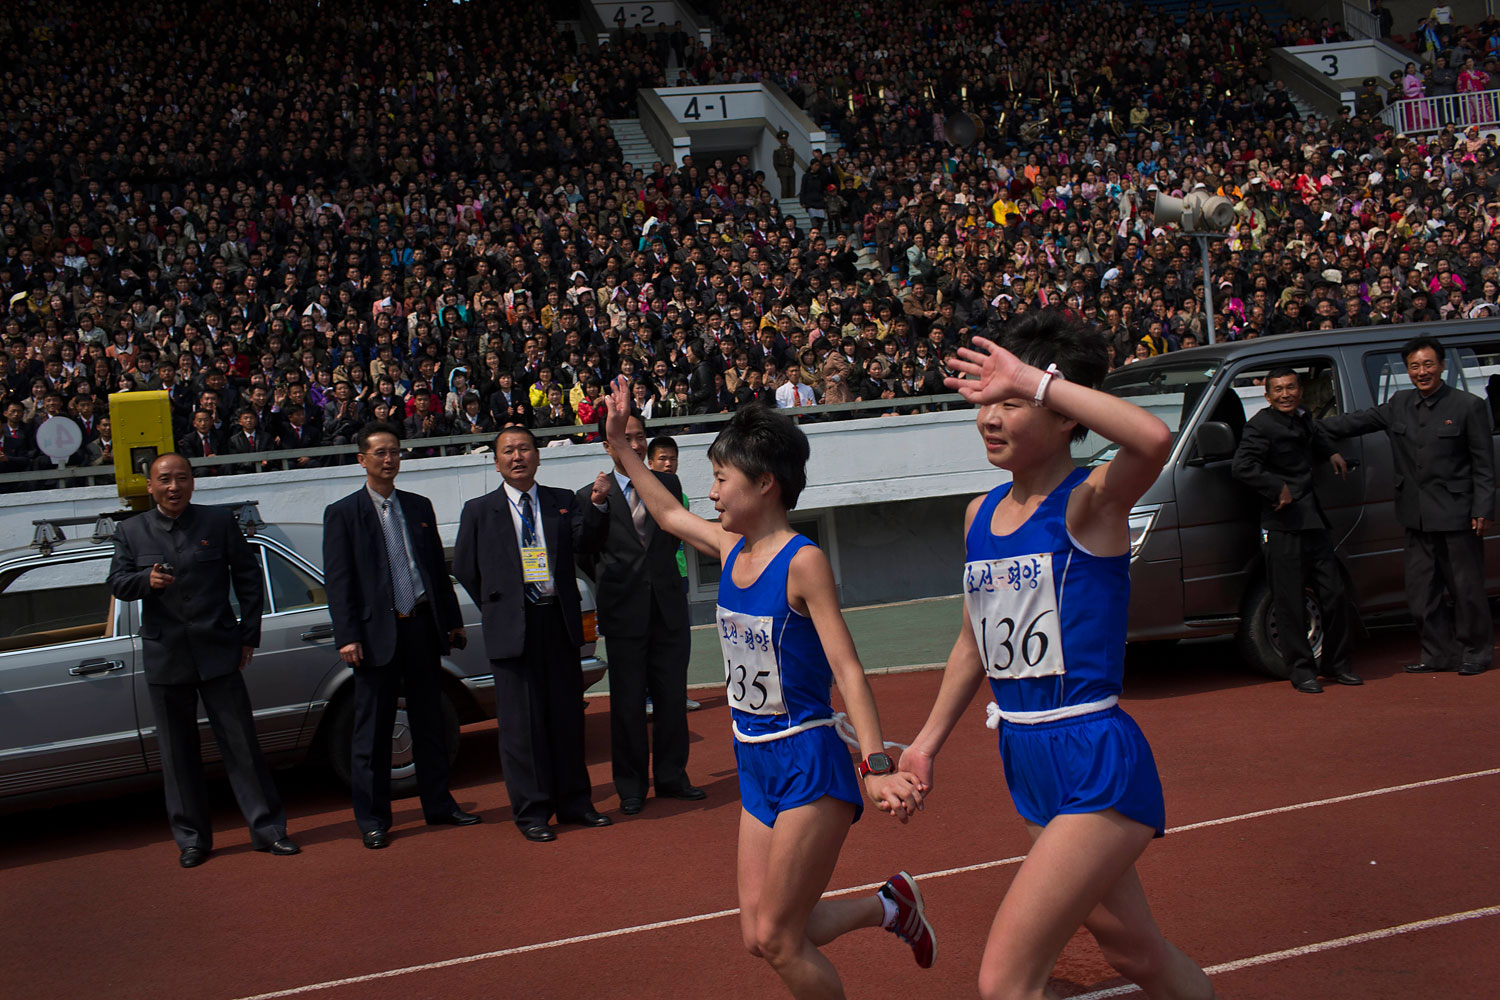 North Korean twin sisters Kim Hye Gyong (135) and Kim Hye Song (136) take a victory lap together inside Kim Il Sung Stadium after placing first and second respectively in the the women's Mangyongdae Prize International Marathon in Pyongyang, on April 13, 2014.